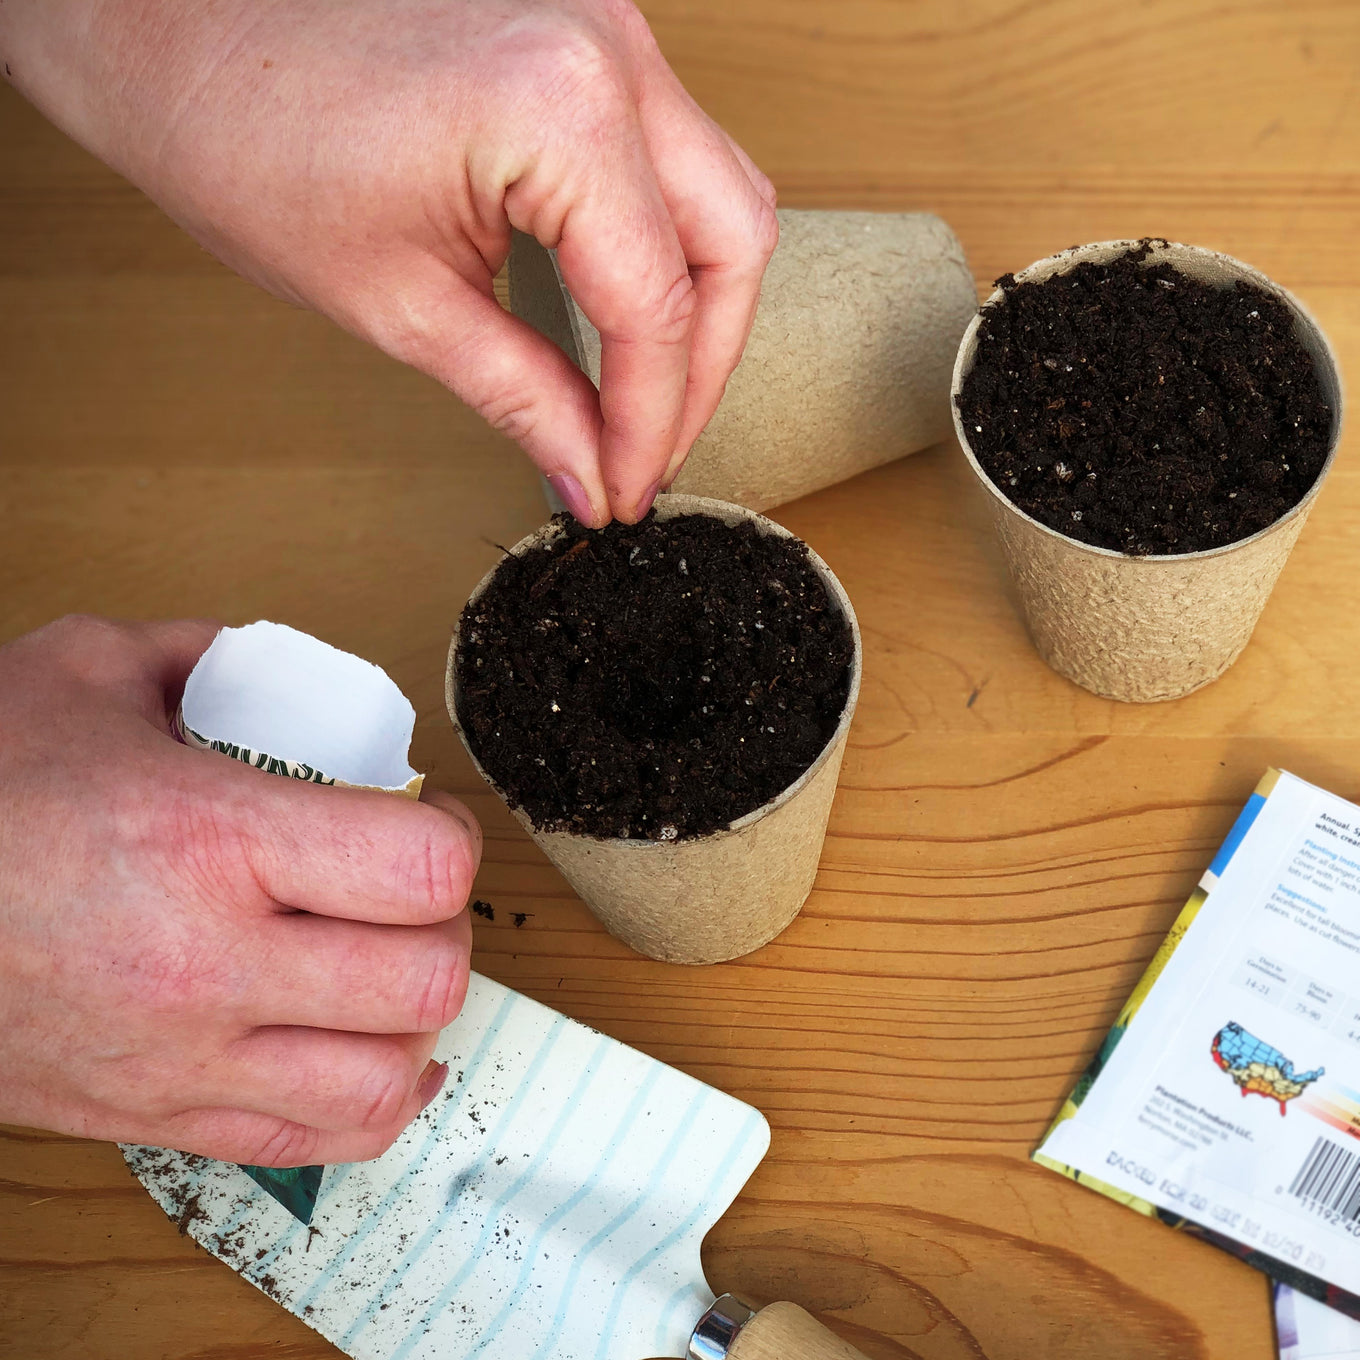 Start your Organic Red Russian Kale seeds in Jiffy peat pots filled with seed starting mix. Transplant seedling with peat pot in order to avoid root shock. Pot will biodegrade.